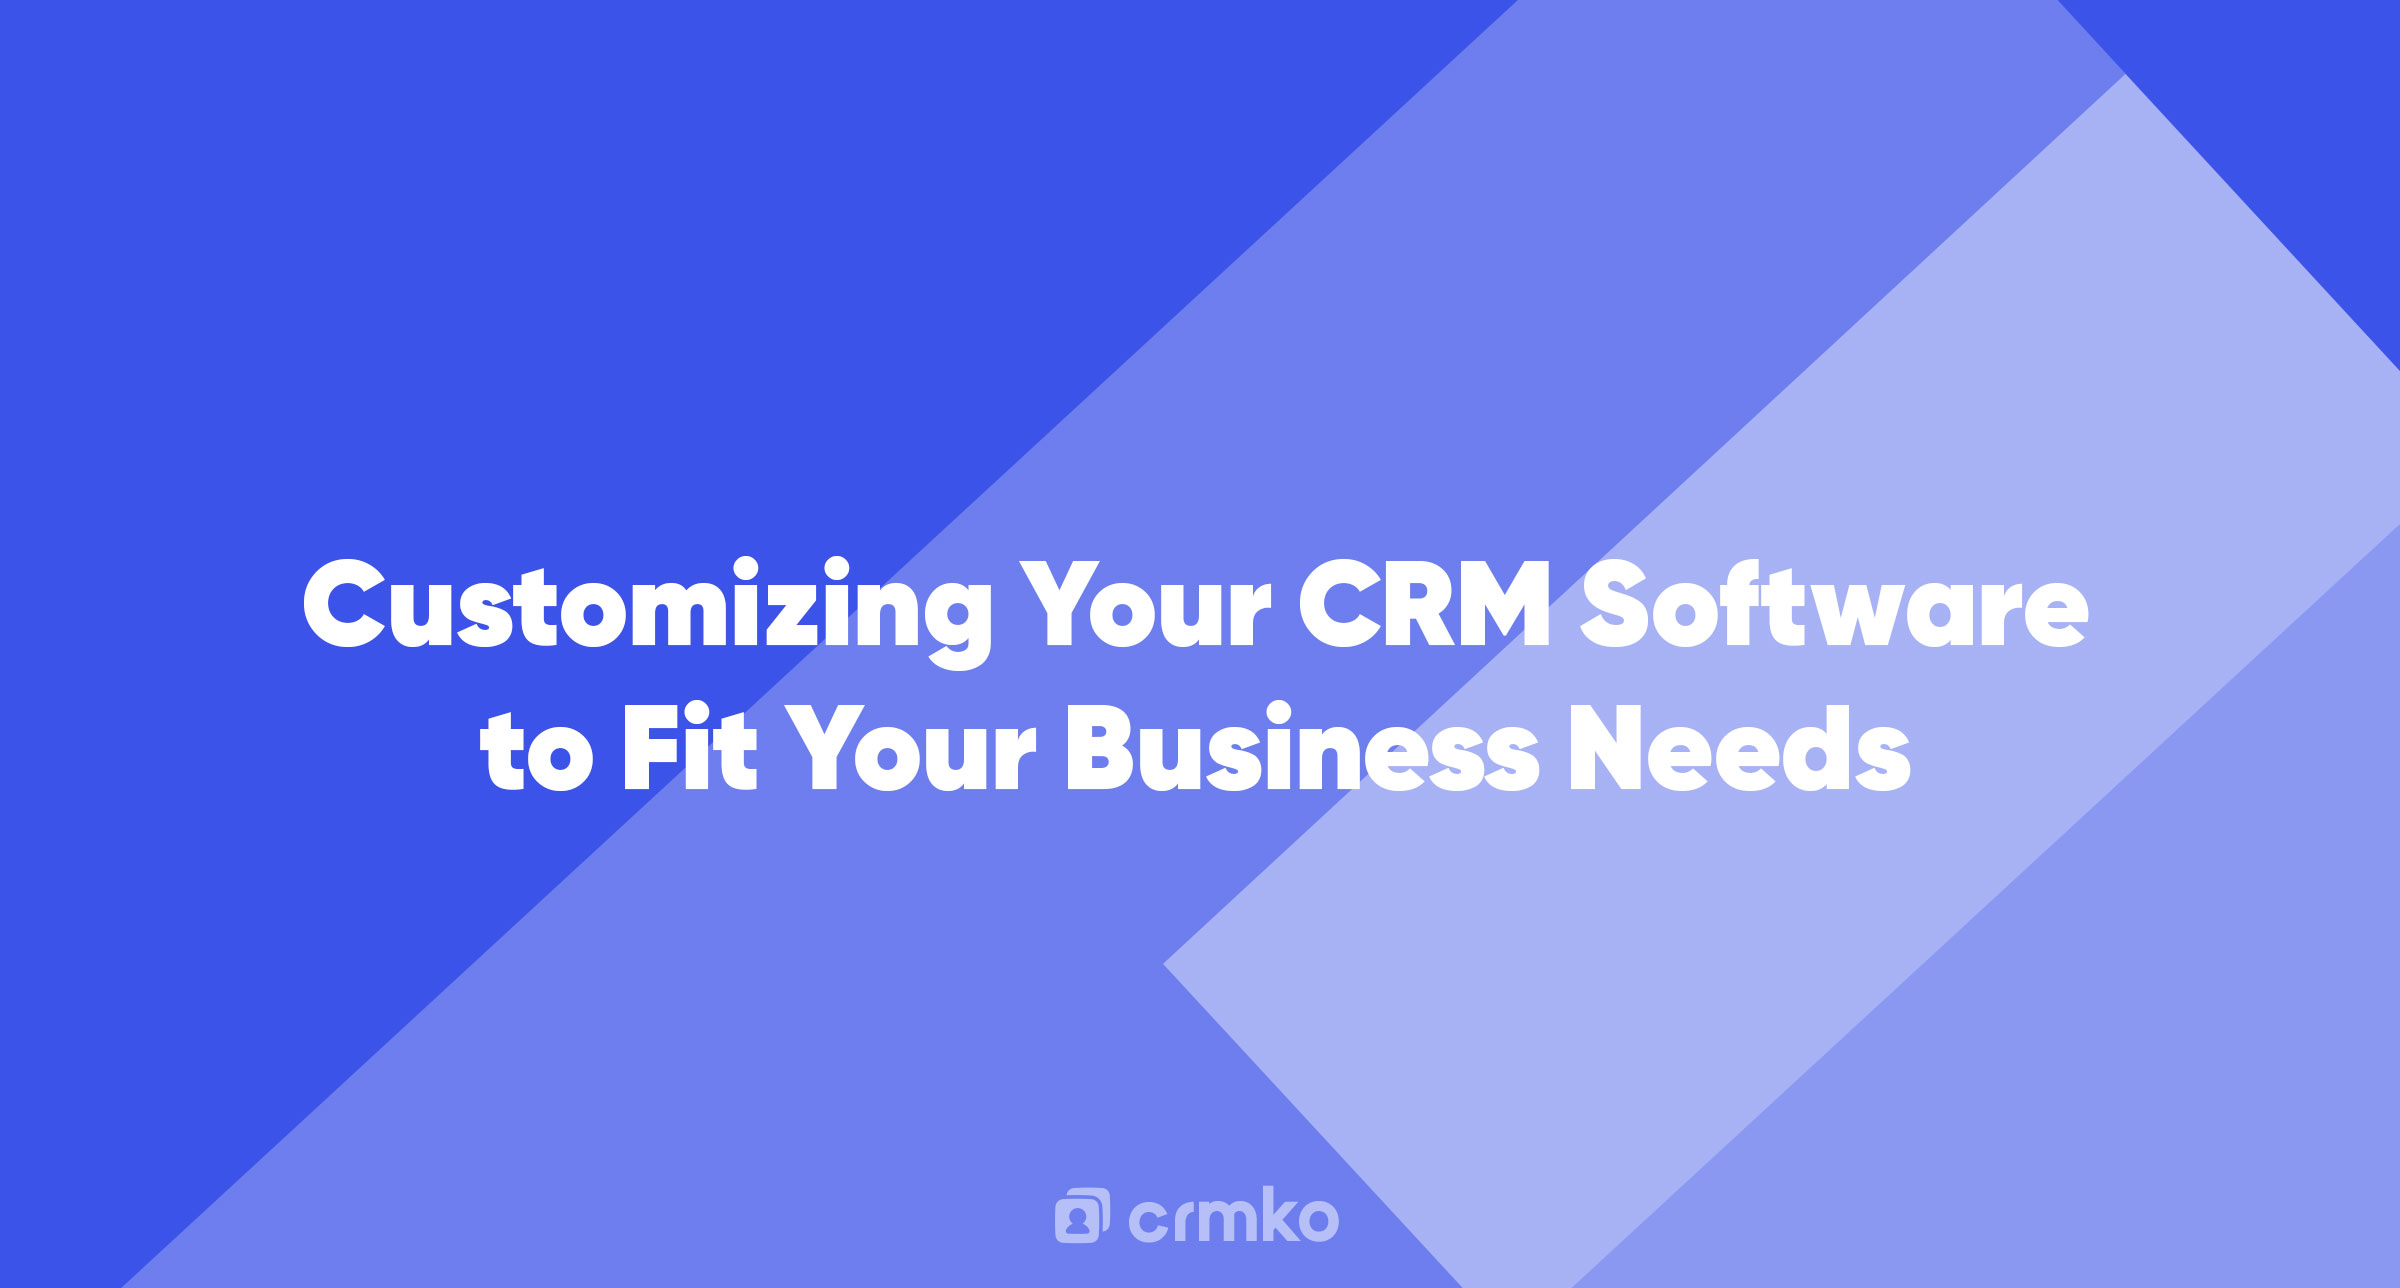 Article | Customizing Your CRM Software to Fit Your Business Needs